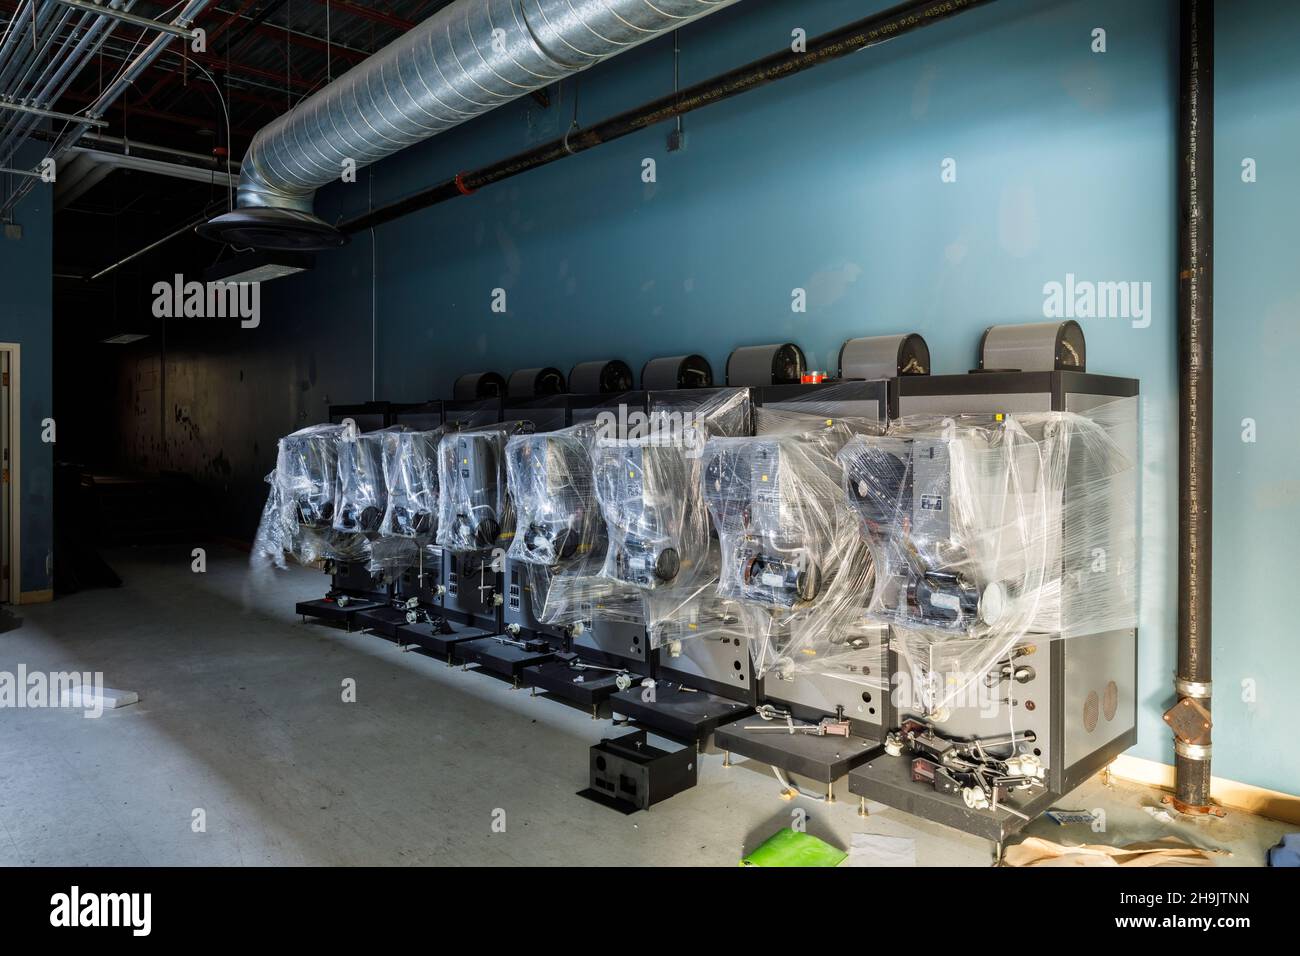 Analogue movie projectors wrapped in plastic.  This location has since been demolished. Stock Photo